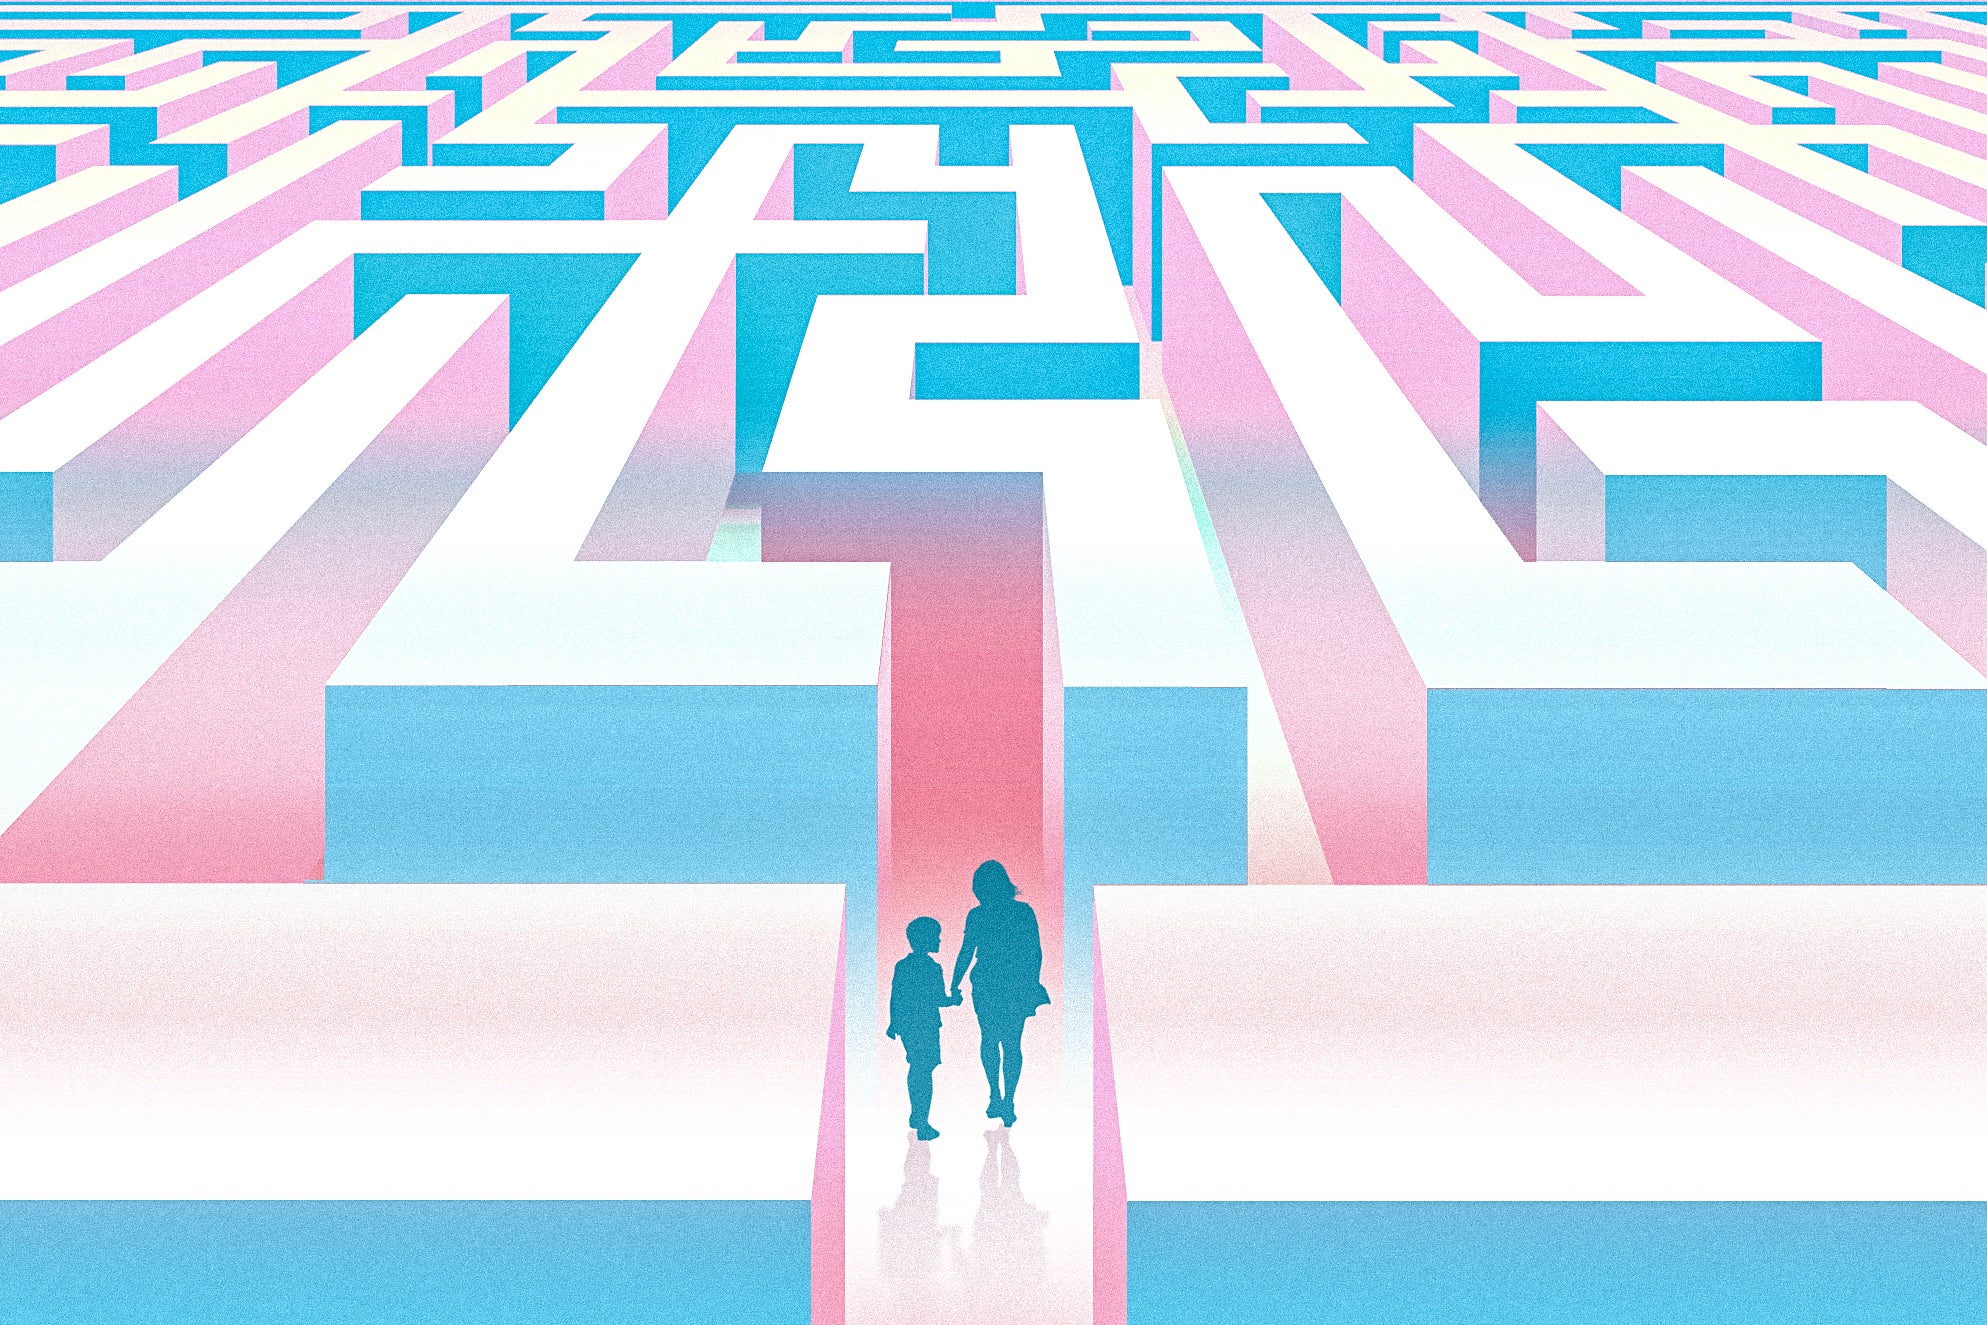 A parent and young child, holding hands, begin to walk through a complicated, twisty blue-and-pink maze.